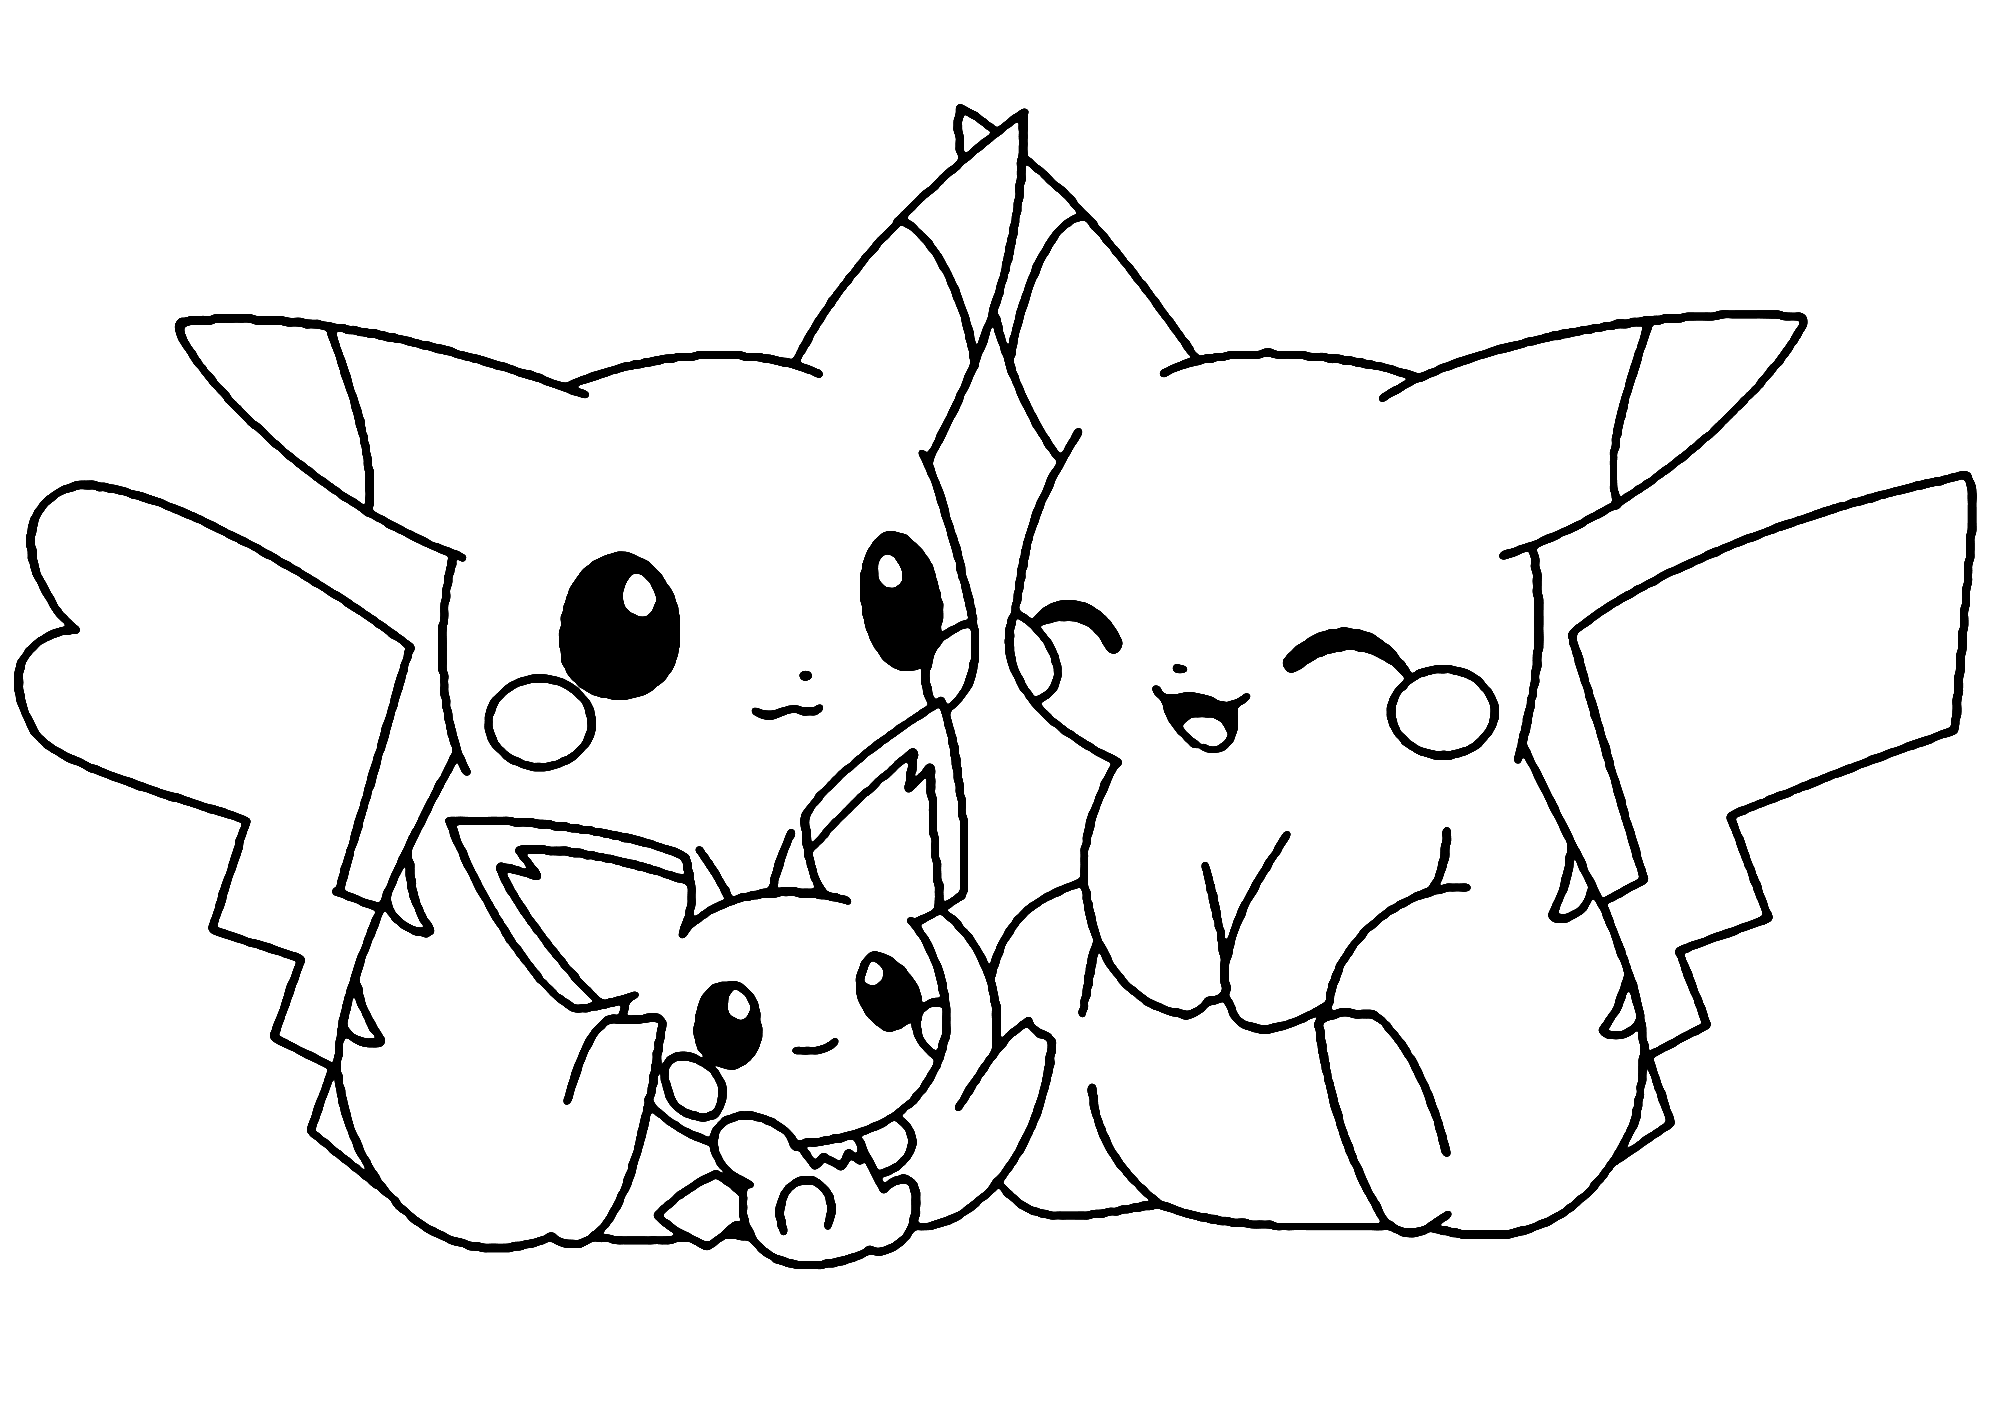 Cute Pokemon Pikachu and Baby Pikachu Coloring Page for Kids